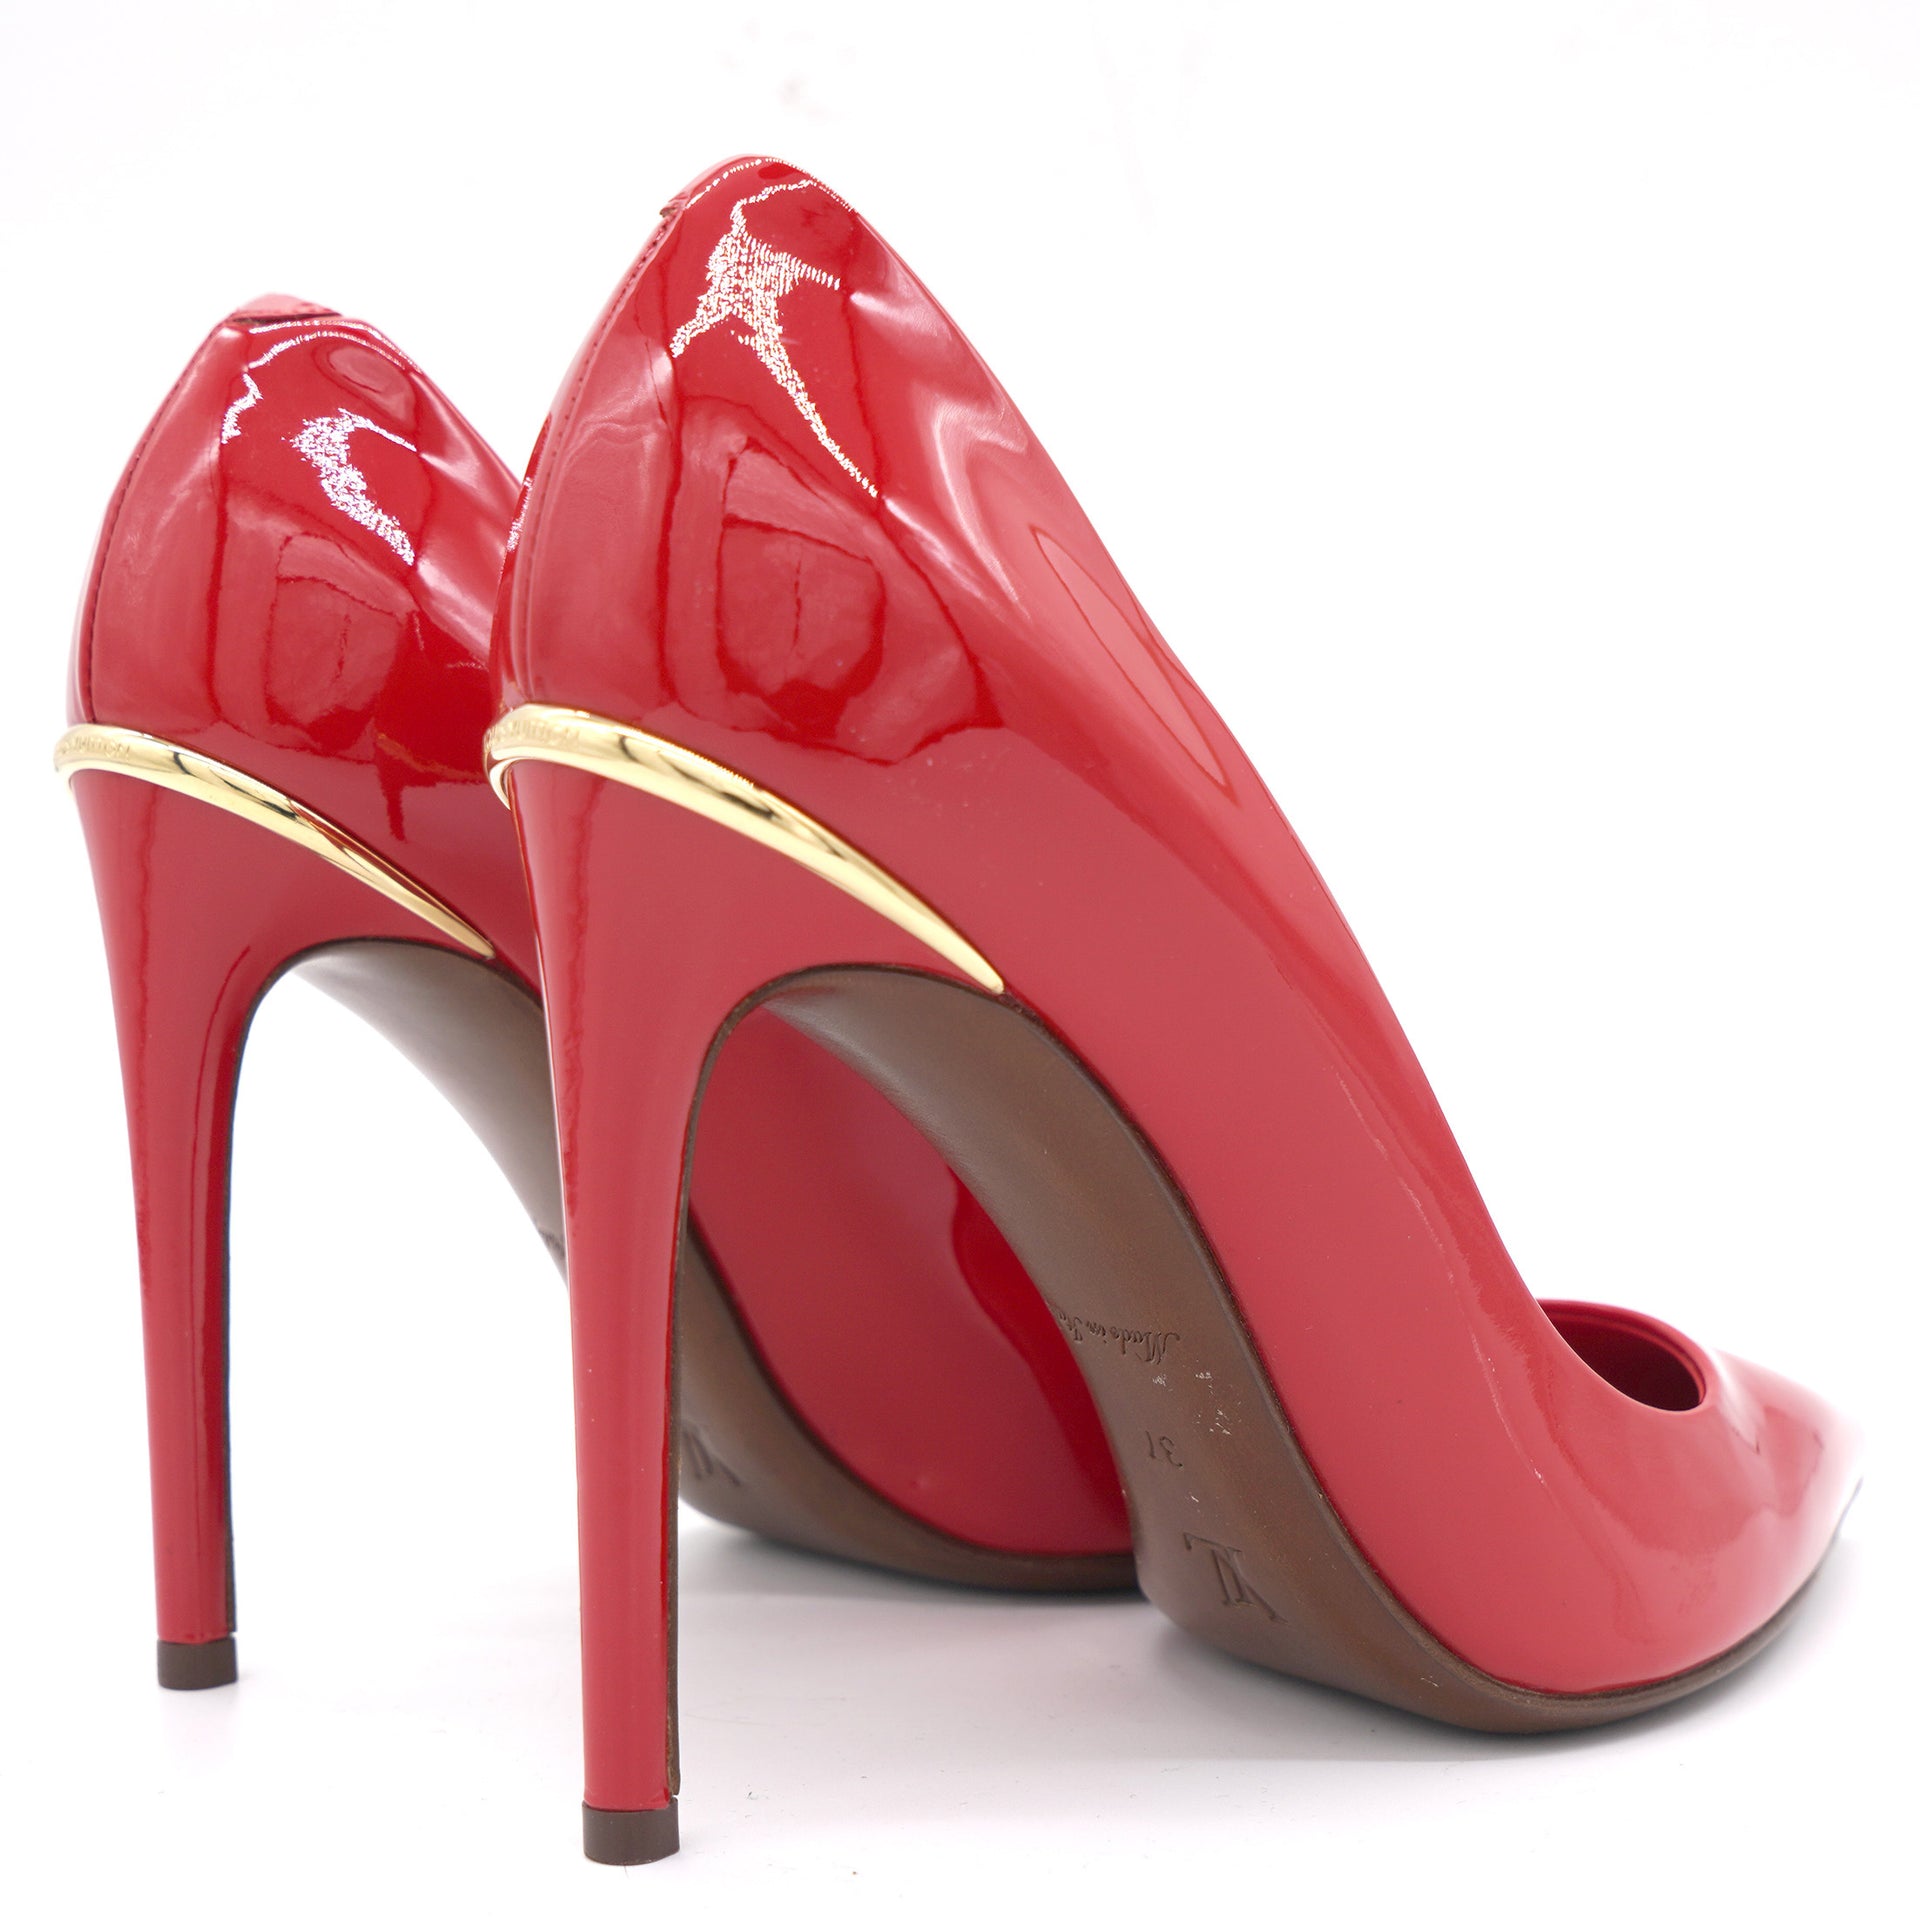 Louis Vuitton Eyeline Red Pump Heels pointed toe patent leather